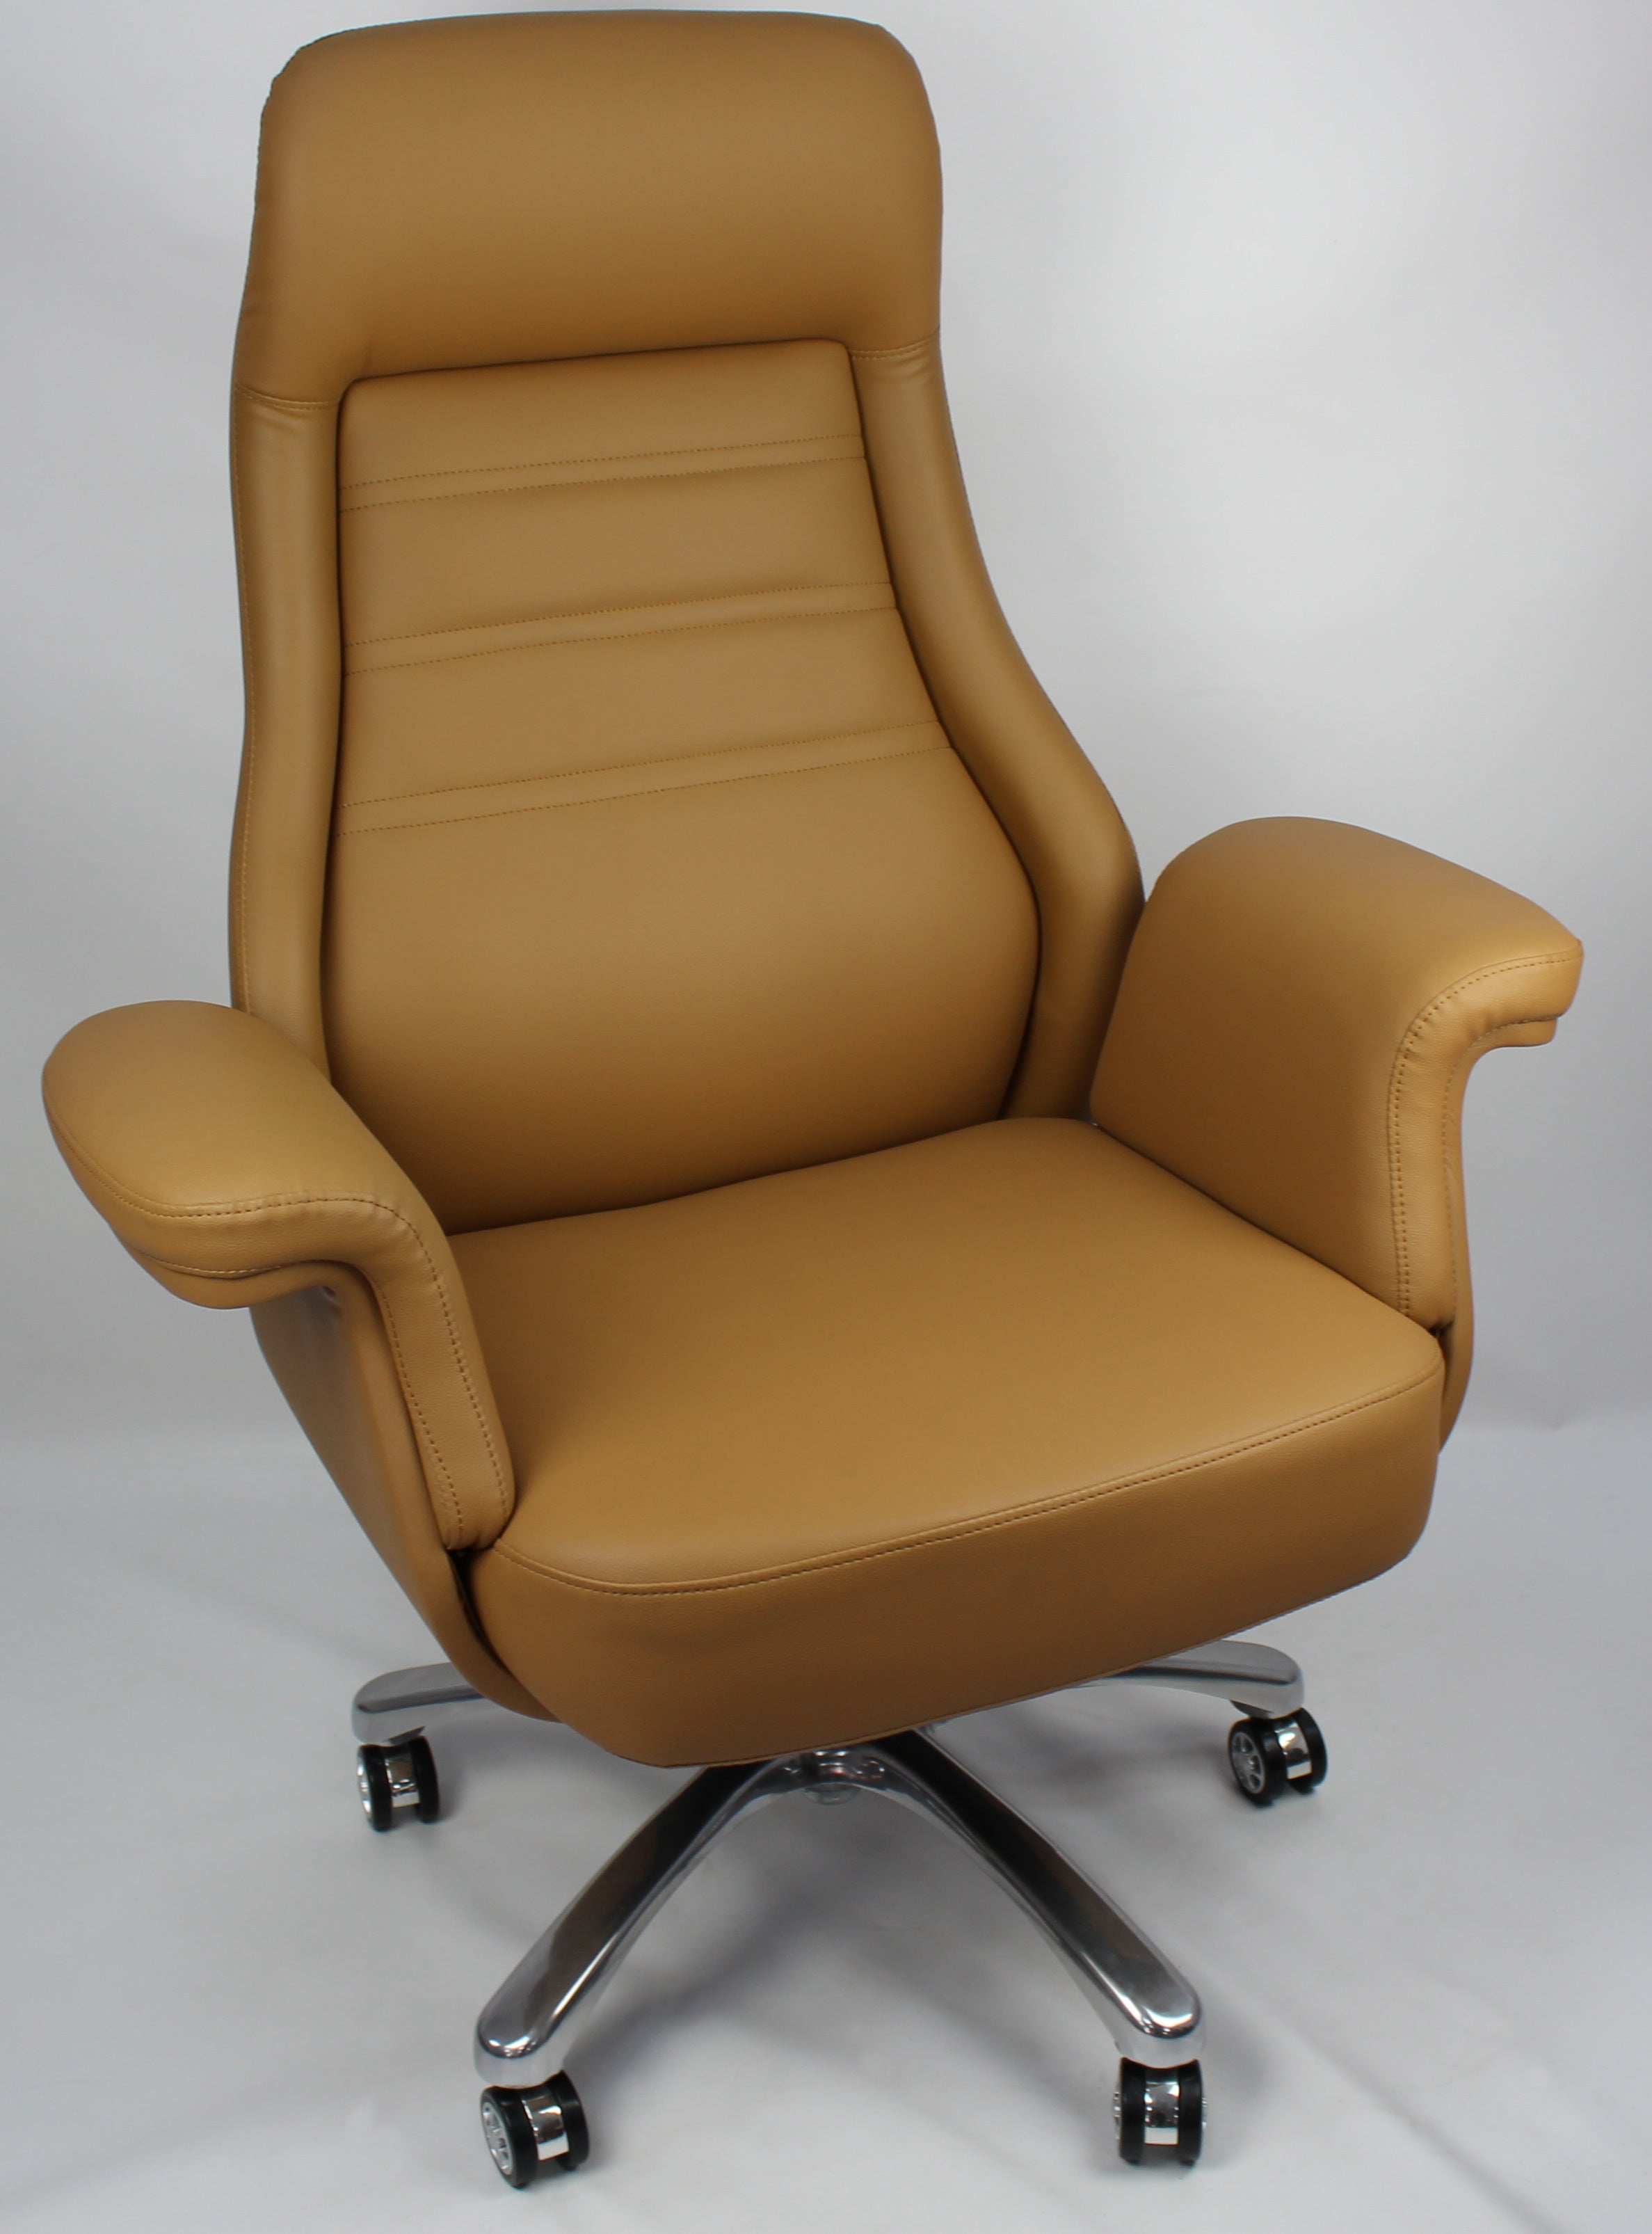 Beige Leather Executive Office Chair - DH-090 Huddersfield